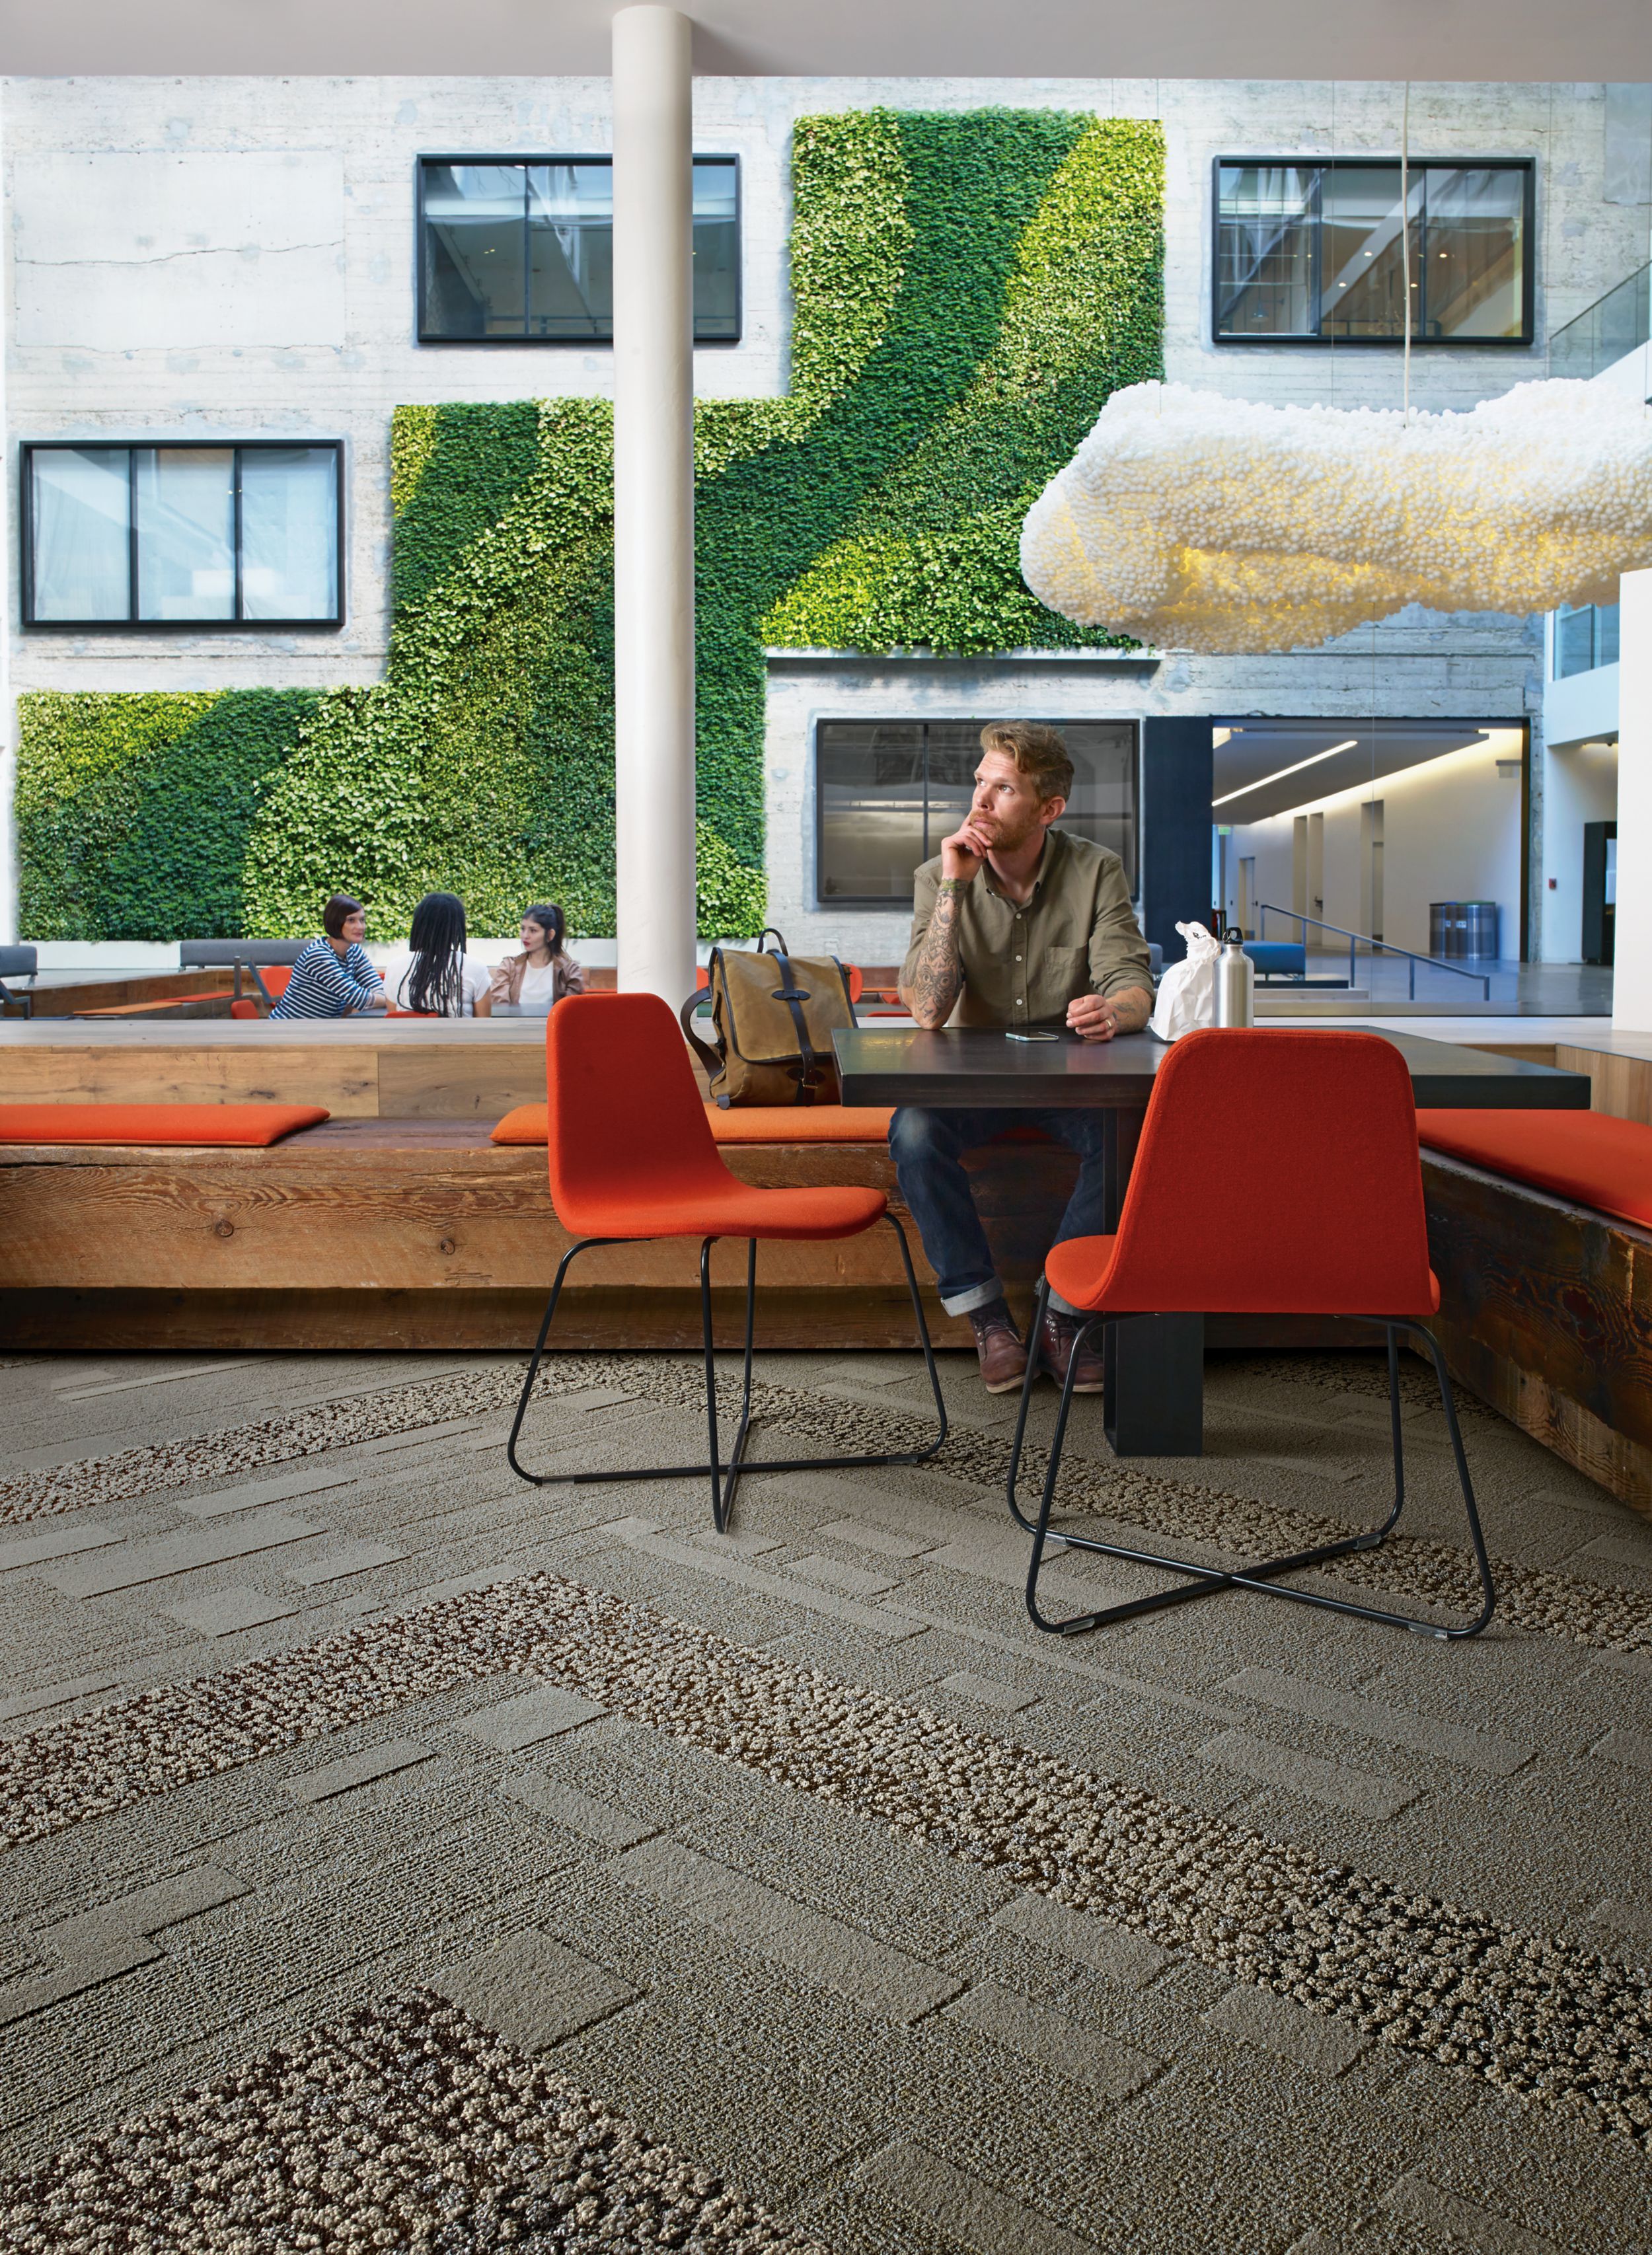 Interface EM552 plank carpet tile with man sitting at table with lunch and group meeting in front of vine wall in the background  afbeeldingnummer 7